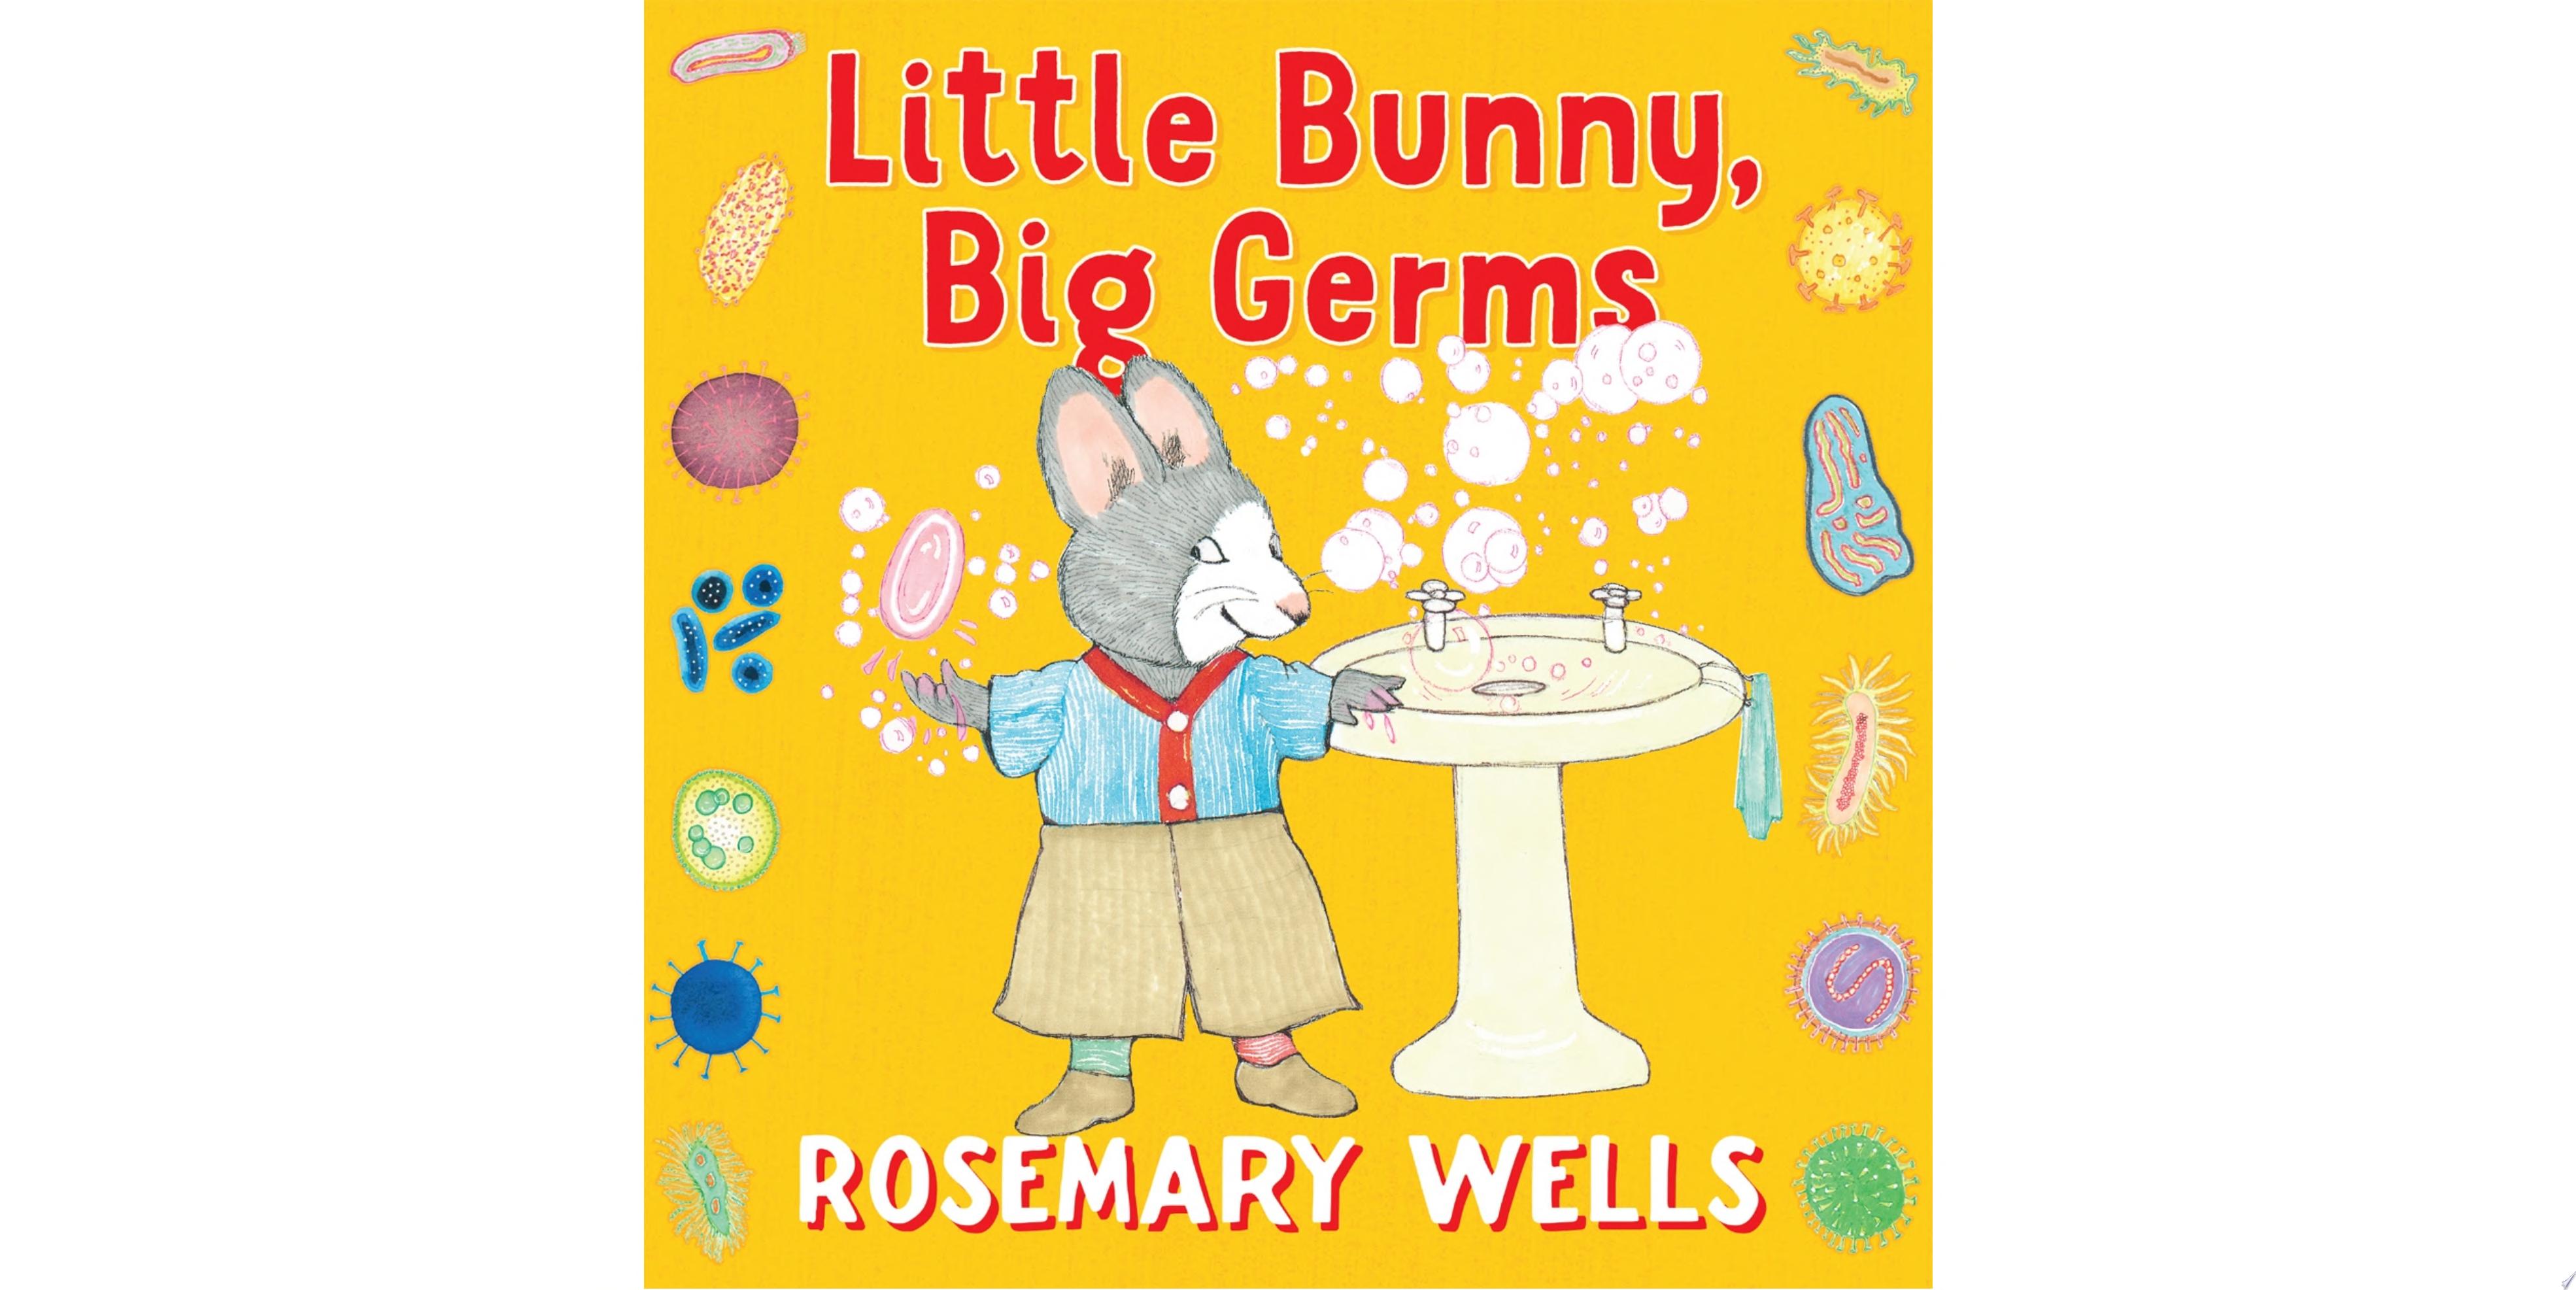 Image for "Little Bunny, Big Germs"